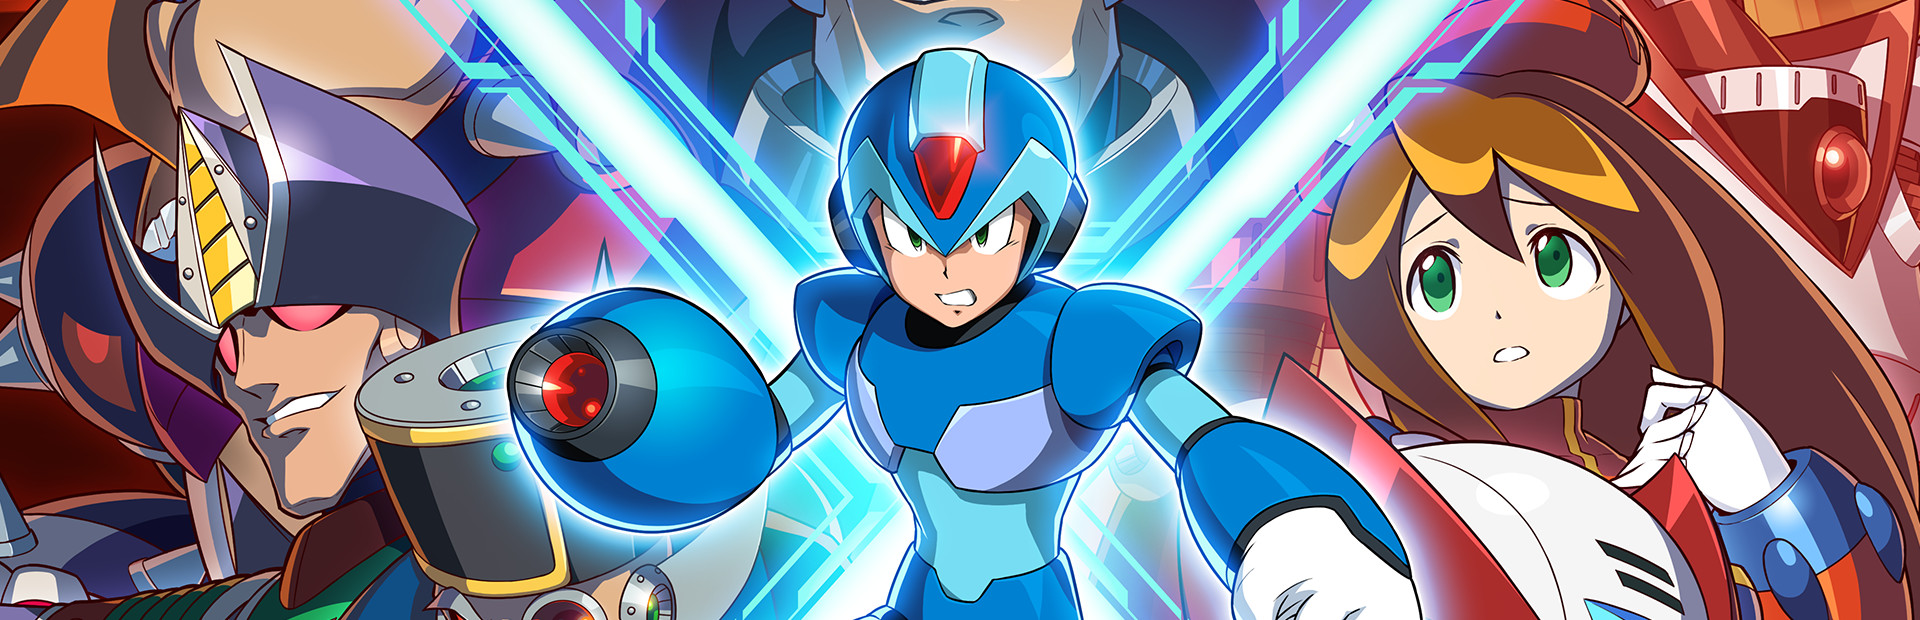 Mega Man X Legacy Collection cover image